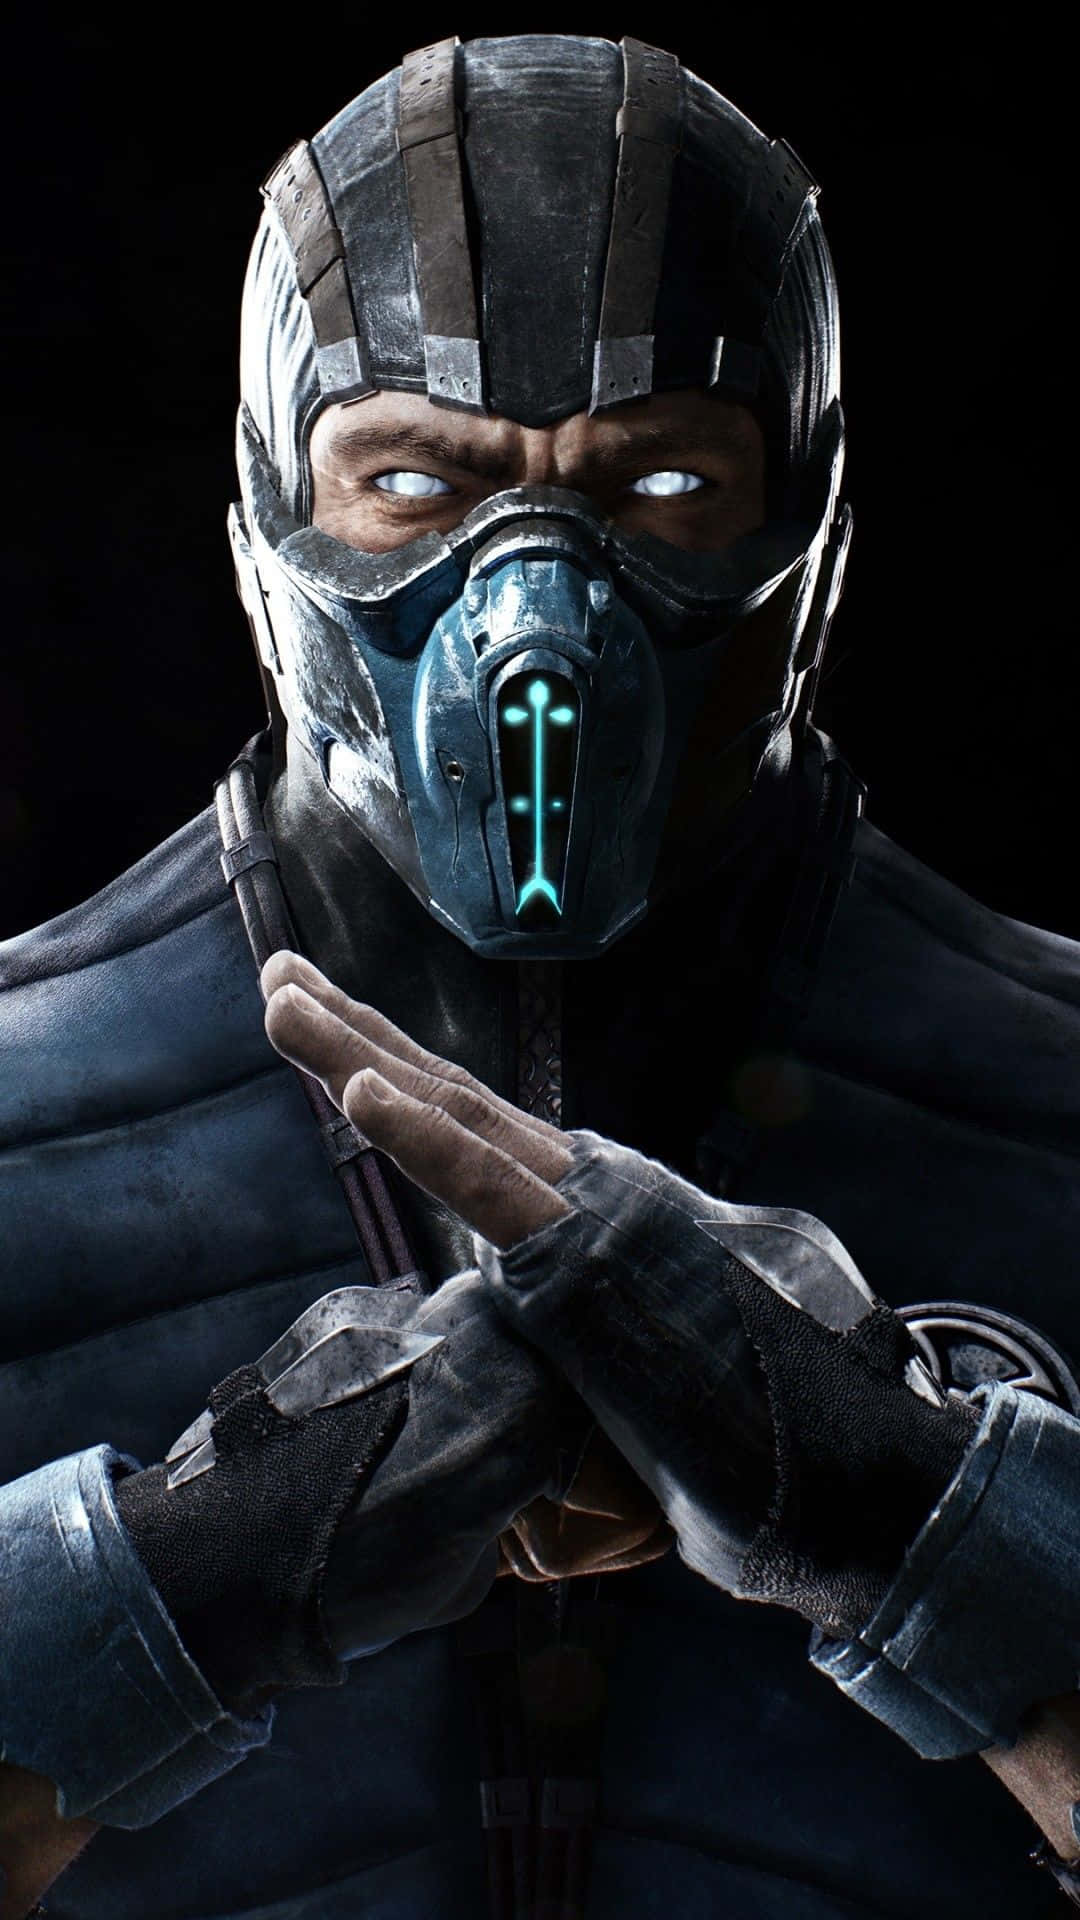 "It's time to unleash your ultimate fighting skills with Mortal Kombat for iPhone!" Wallpaper